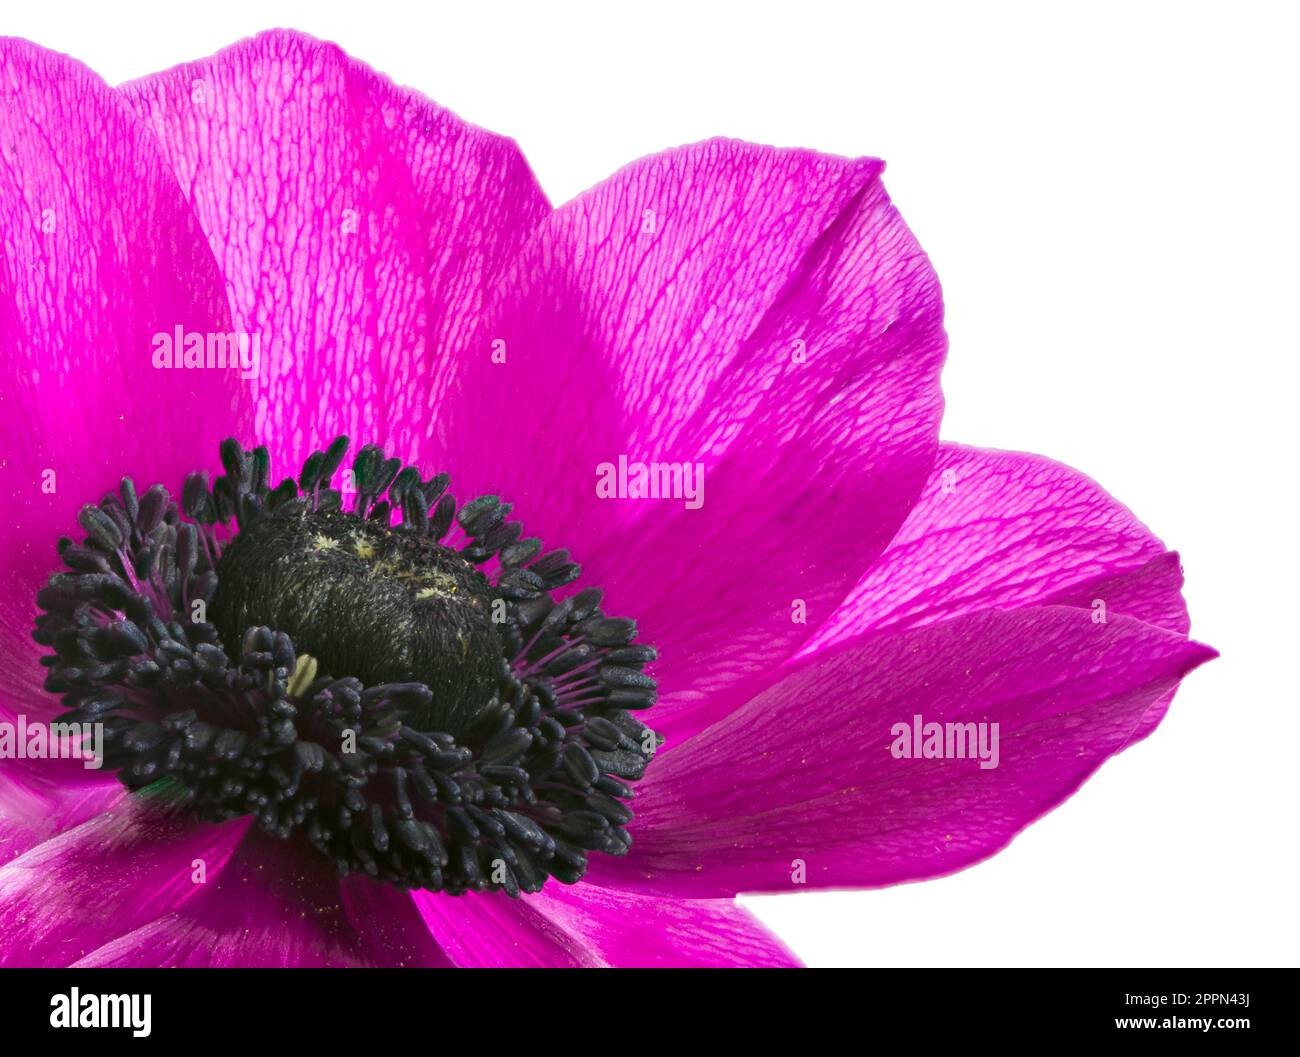 Macro of an isolated purple anemone flower blossom Stock Photo